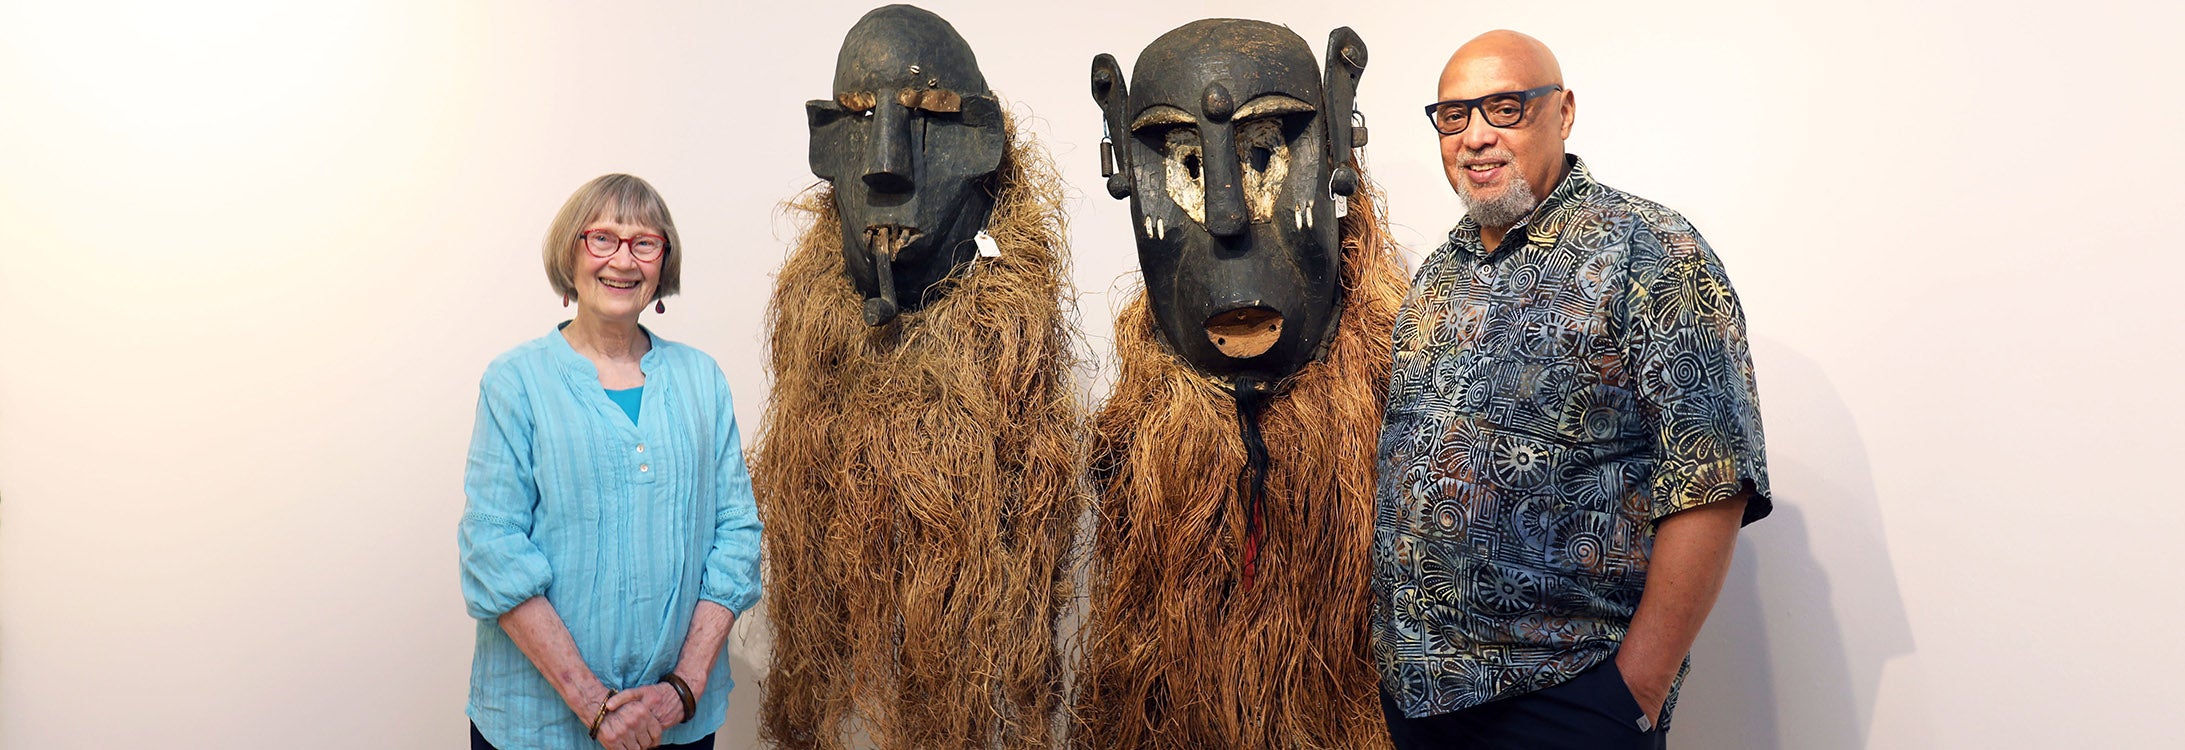 Celeste and Reginald Hodges of Durham stand beside 1950s Gongoli masks they donated to East Carolina University. The masks are part of a collection on exhibit at the Wellington B. Gray Gallery.